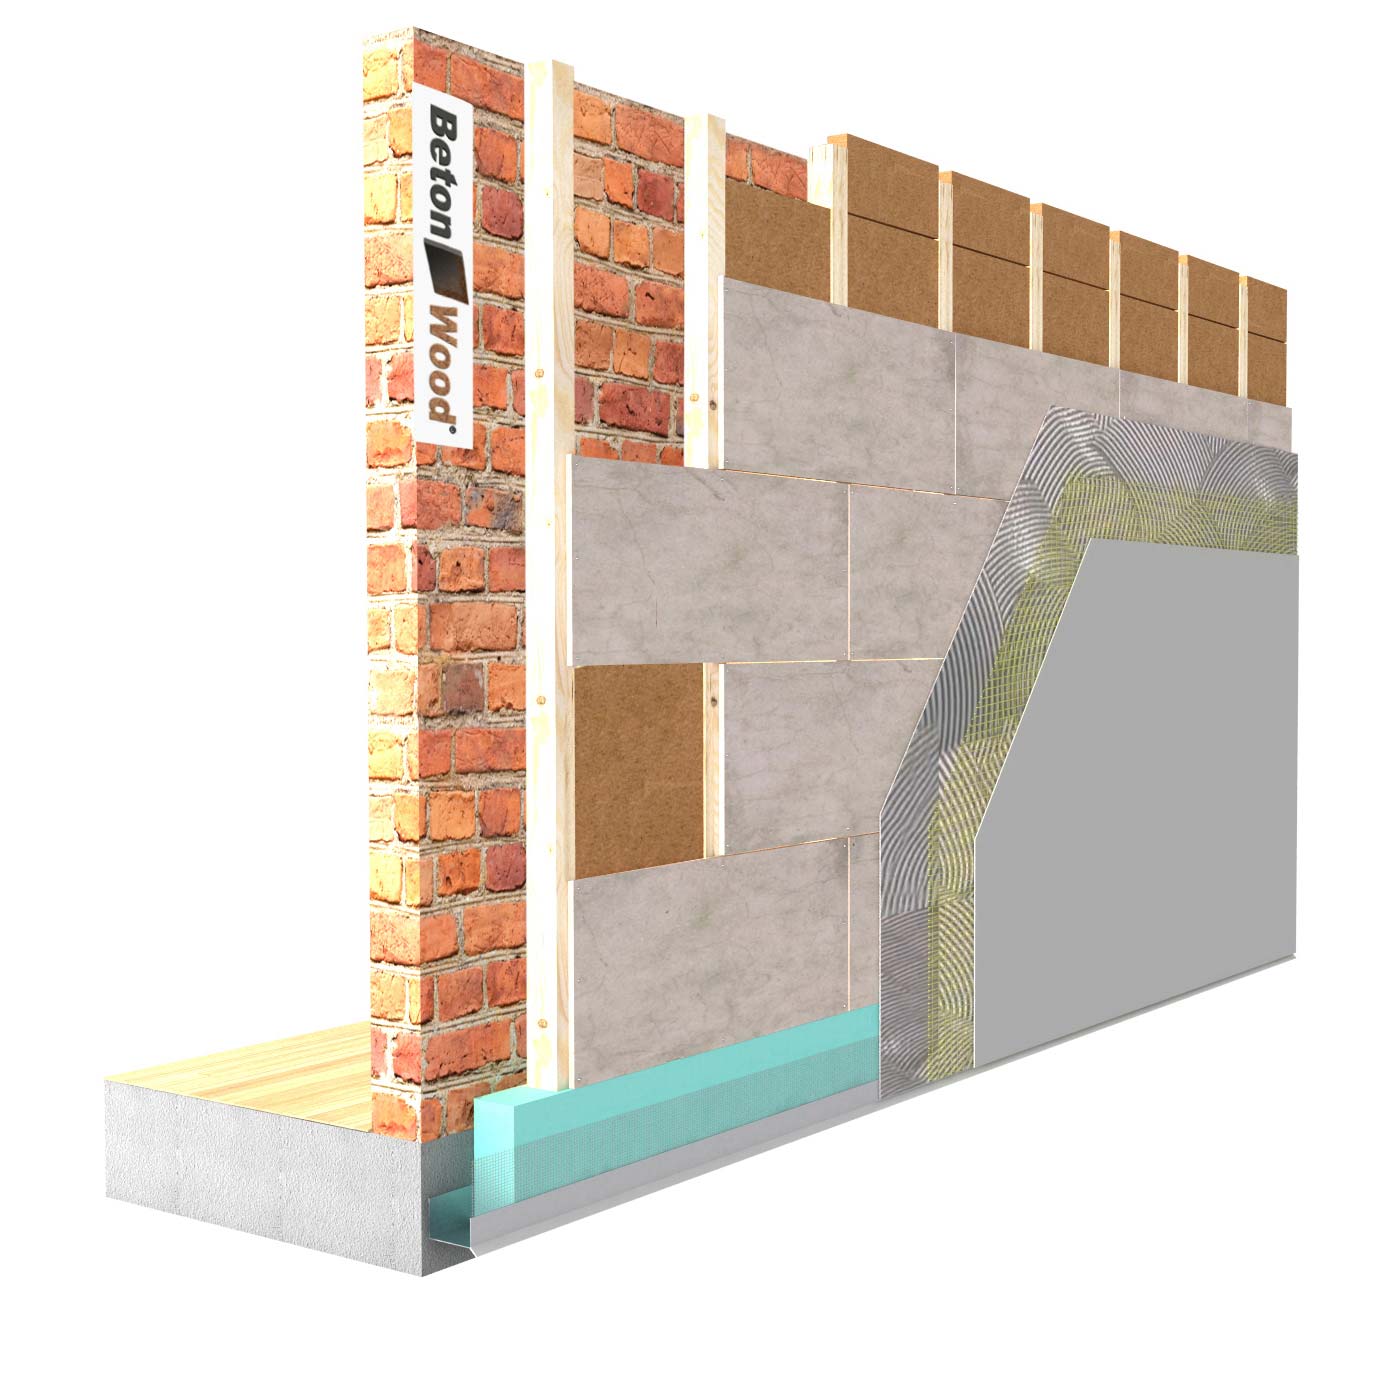 External insulation system with Protect dry fiber wood on masonry